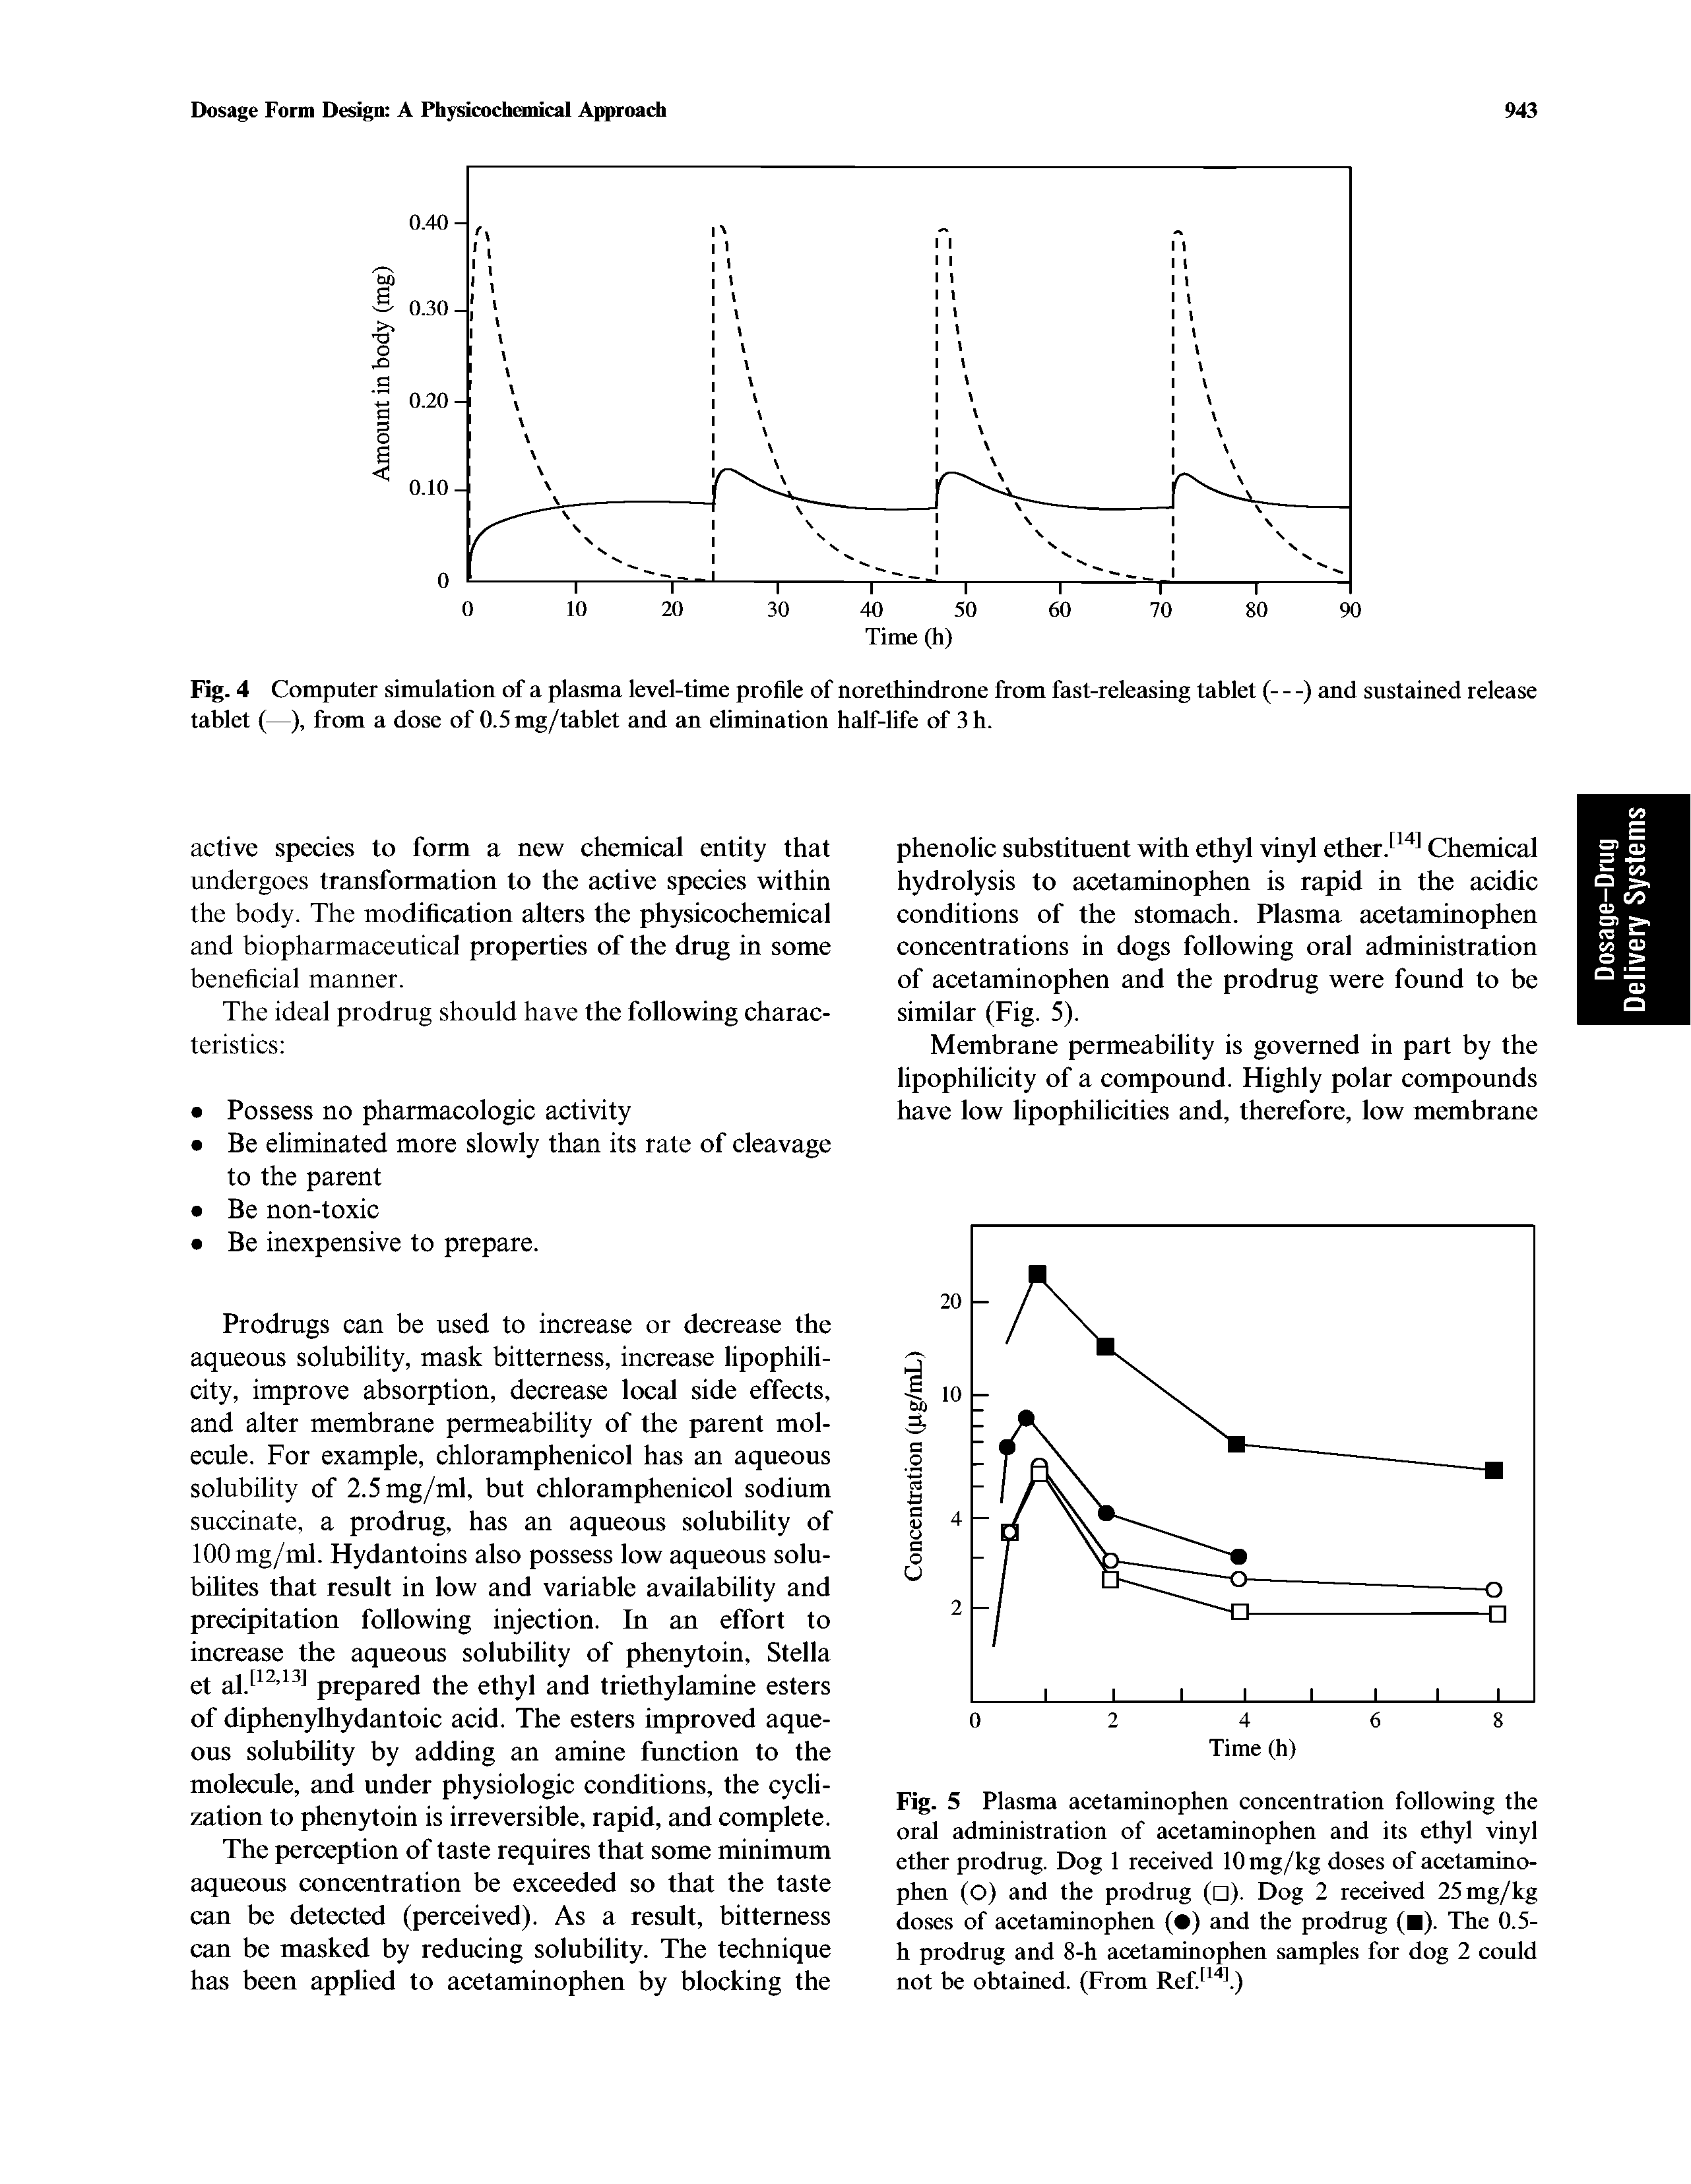 Fig. 5 Plasma acetaminophen concentration following the oral administration of acetaminophen and its ethyl vinyl ether prodrug. Dog 1 received lOmg/kg doses of acetaminophen (O) and the prodrug ( ). Dog 2 received 25mg/kg doses of acetaminophen ( ) and the prodrug ( ). The 0.5-h prodrug and 8-h acetaminophen samples for dog 2 could not be obtained. (From Ref. " f)...